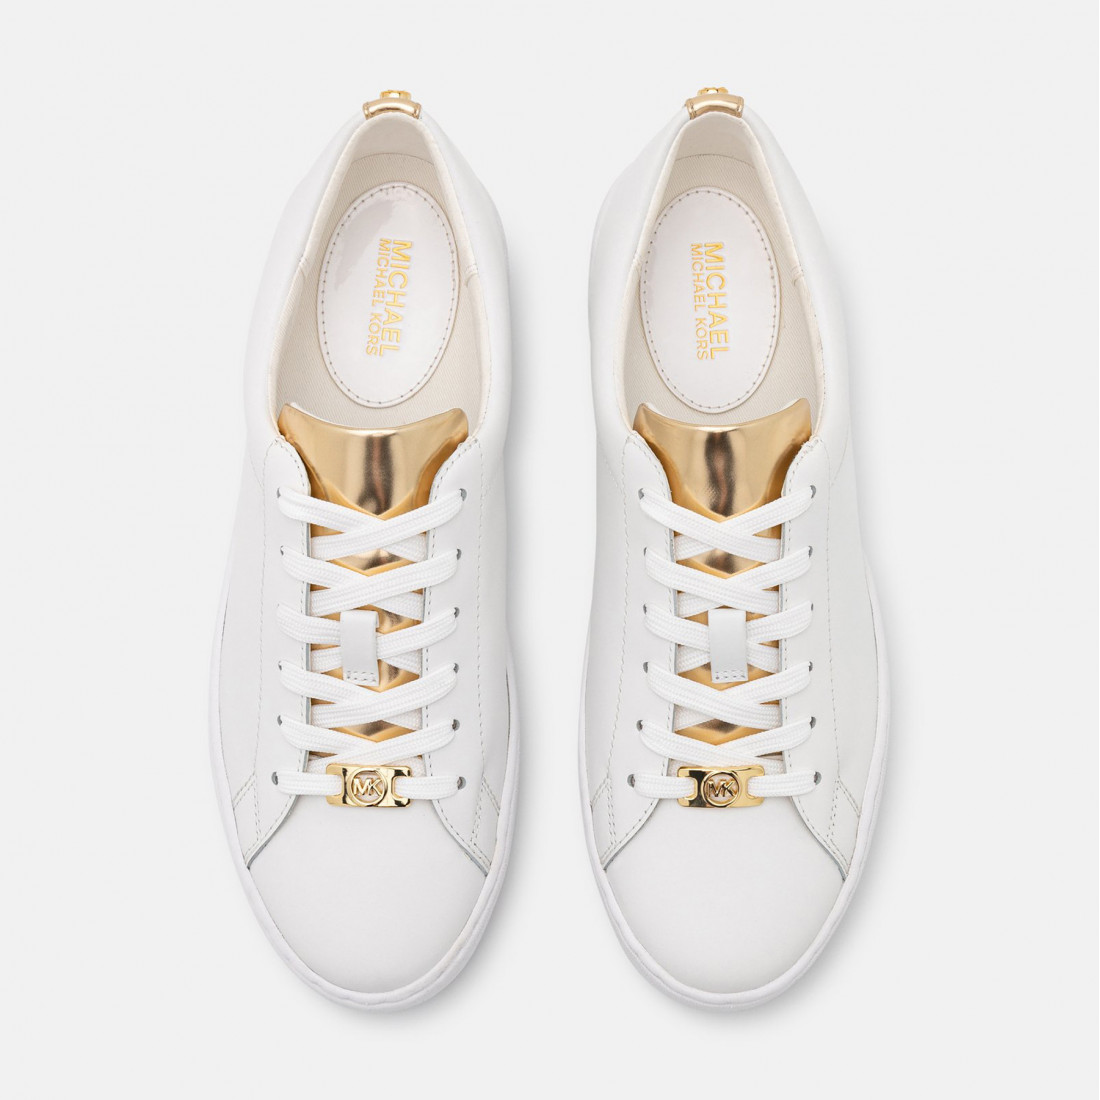 Sneakers MICHAEL MICHAEL KORS  Allie Stride Trainer 43S2ALFS3D Champagne   Sneakers  Scarpe basse  Donna  eschuhech